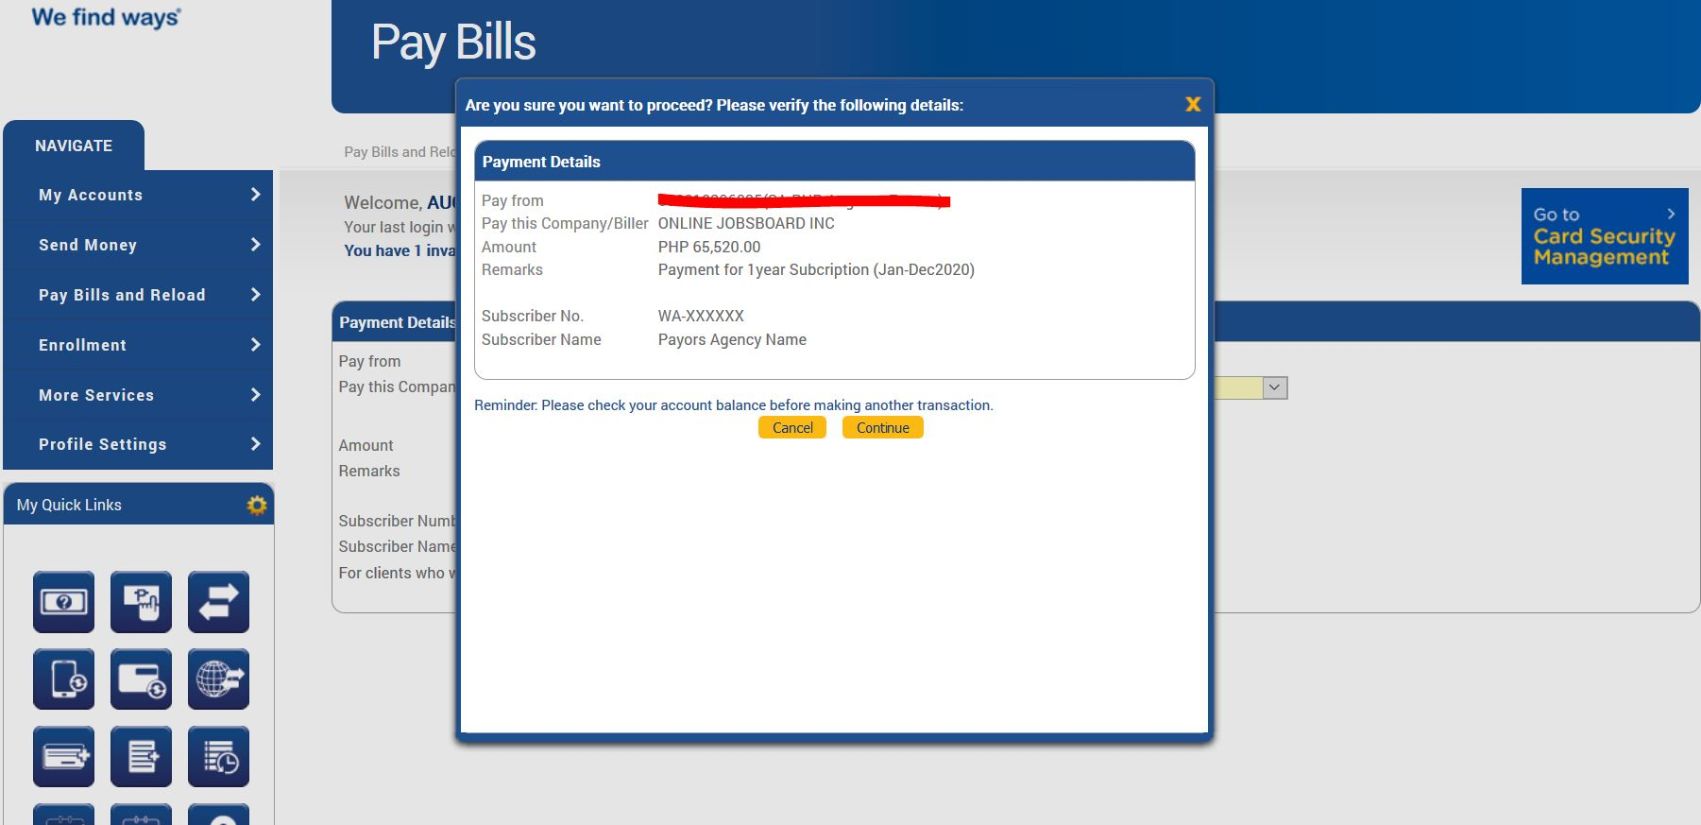 BDO Pay bills with Details